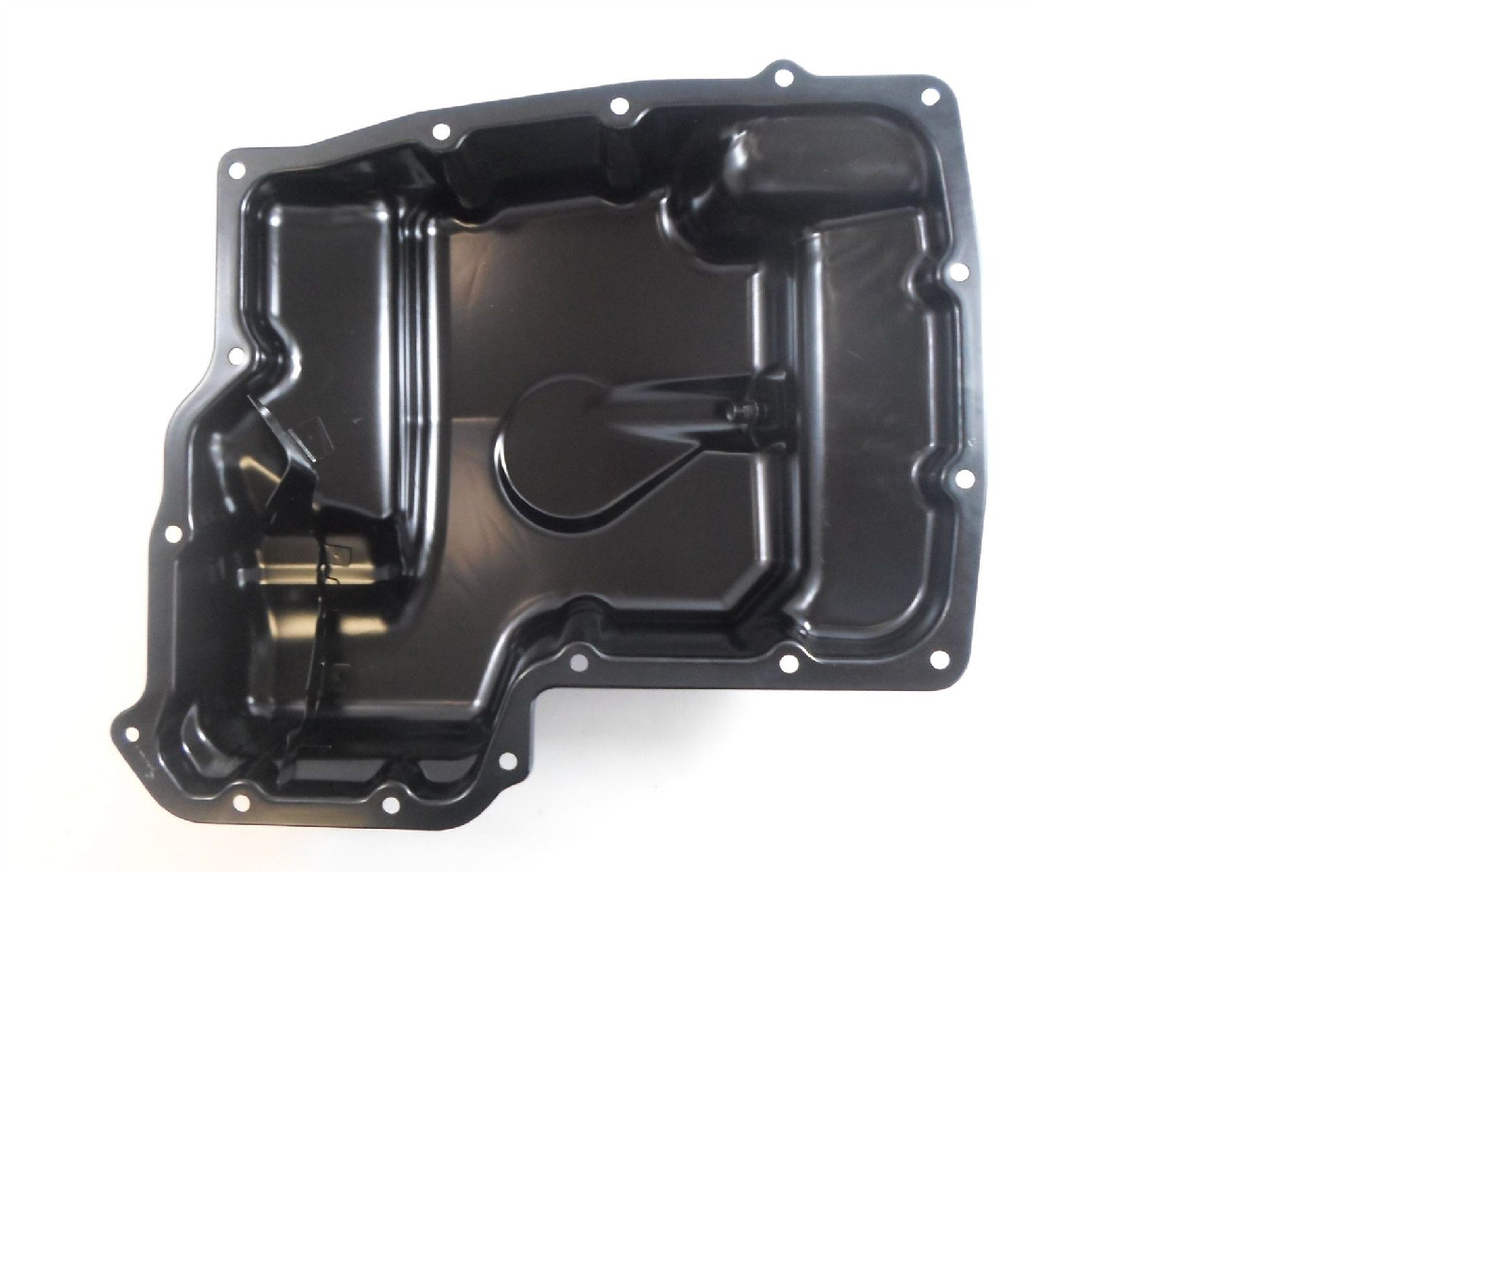 New Ford Transit 2000 to 2014 mk6 2.0 and mk7 2.2 oil sump